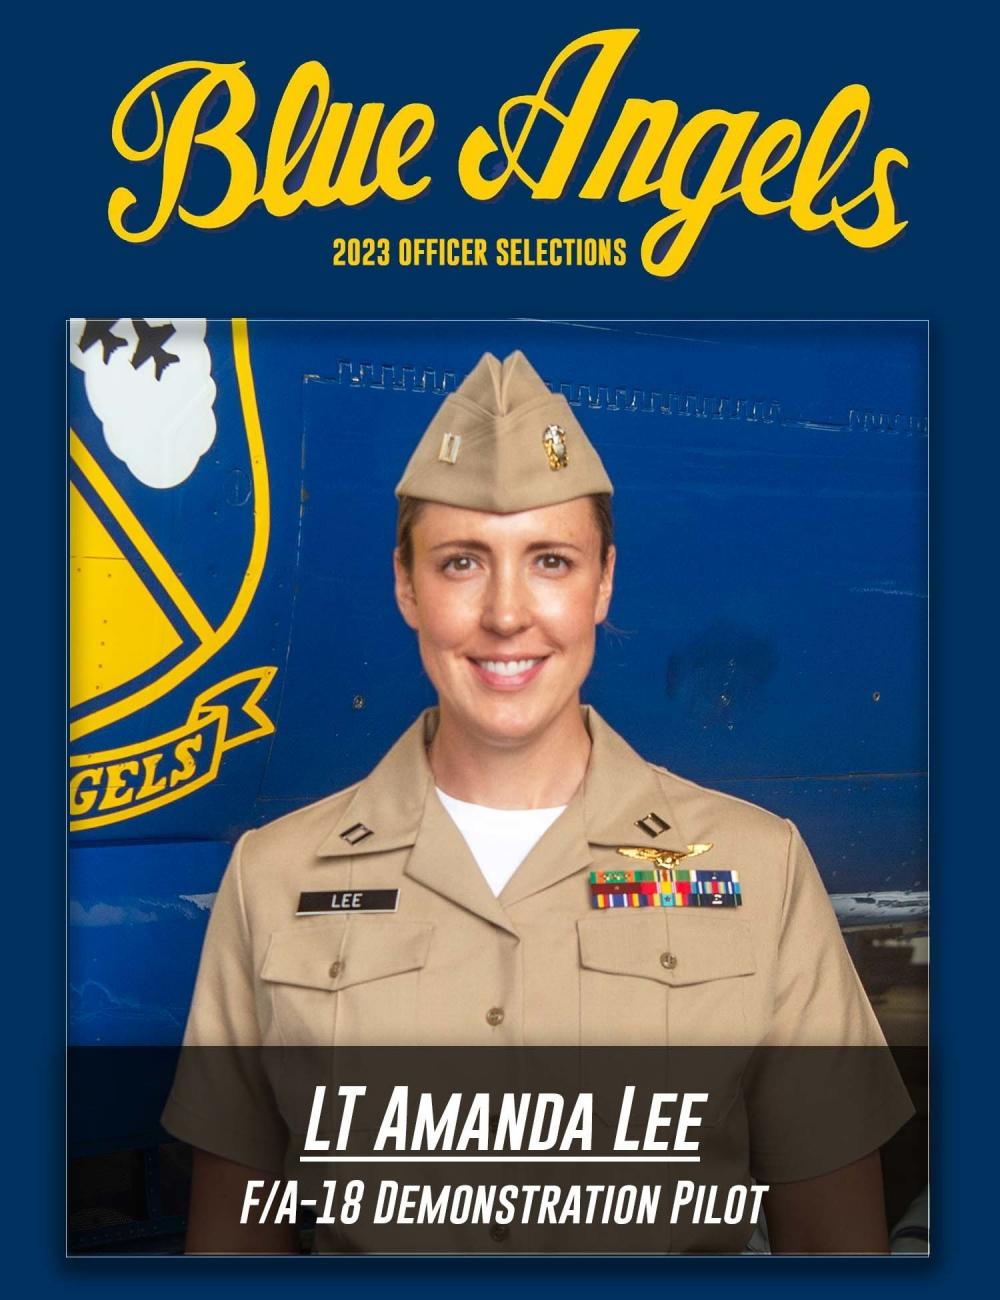 Lt. Amanda Lee will be the first female pilot to fly F-18s with the Blue Angels.